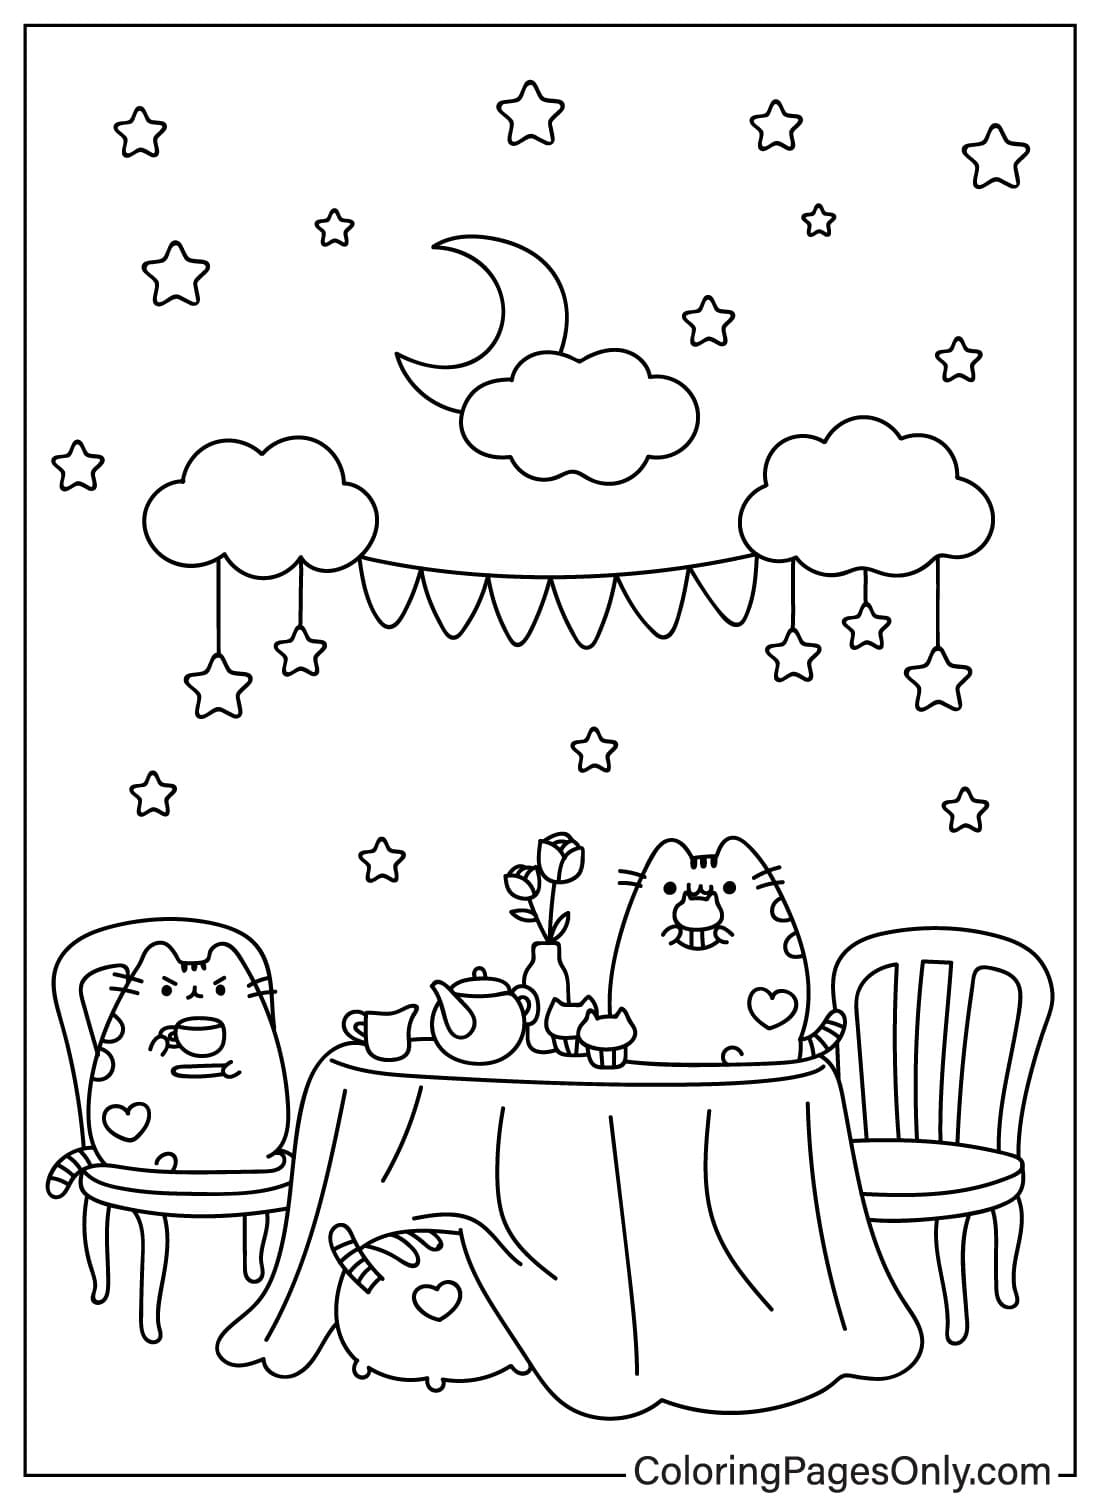 Coloring Page Pusheen Drinks Tea Together from Pusheen